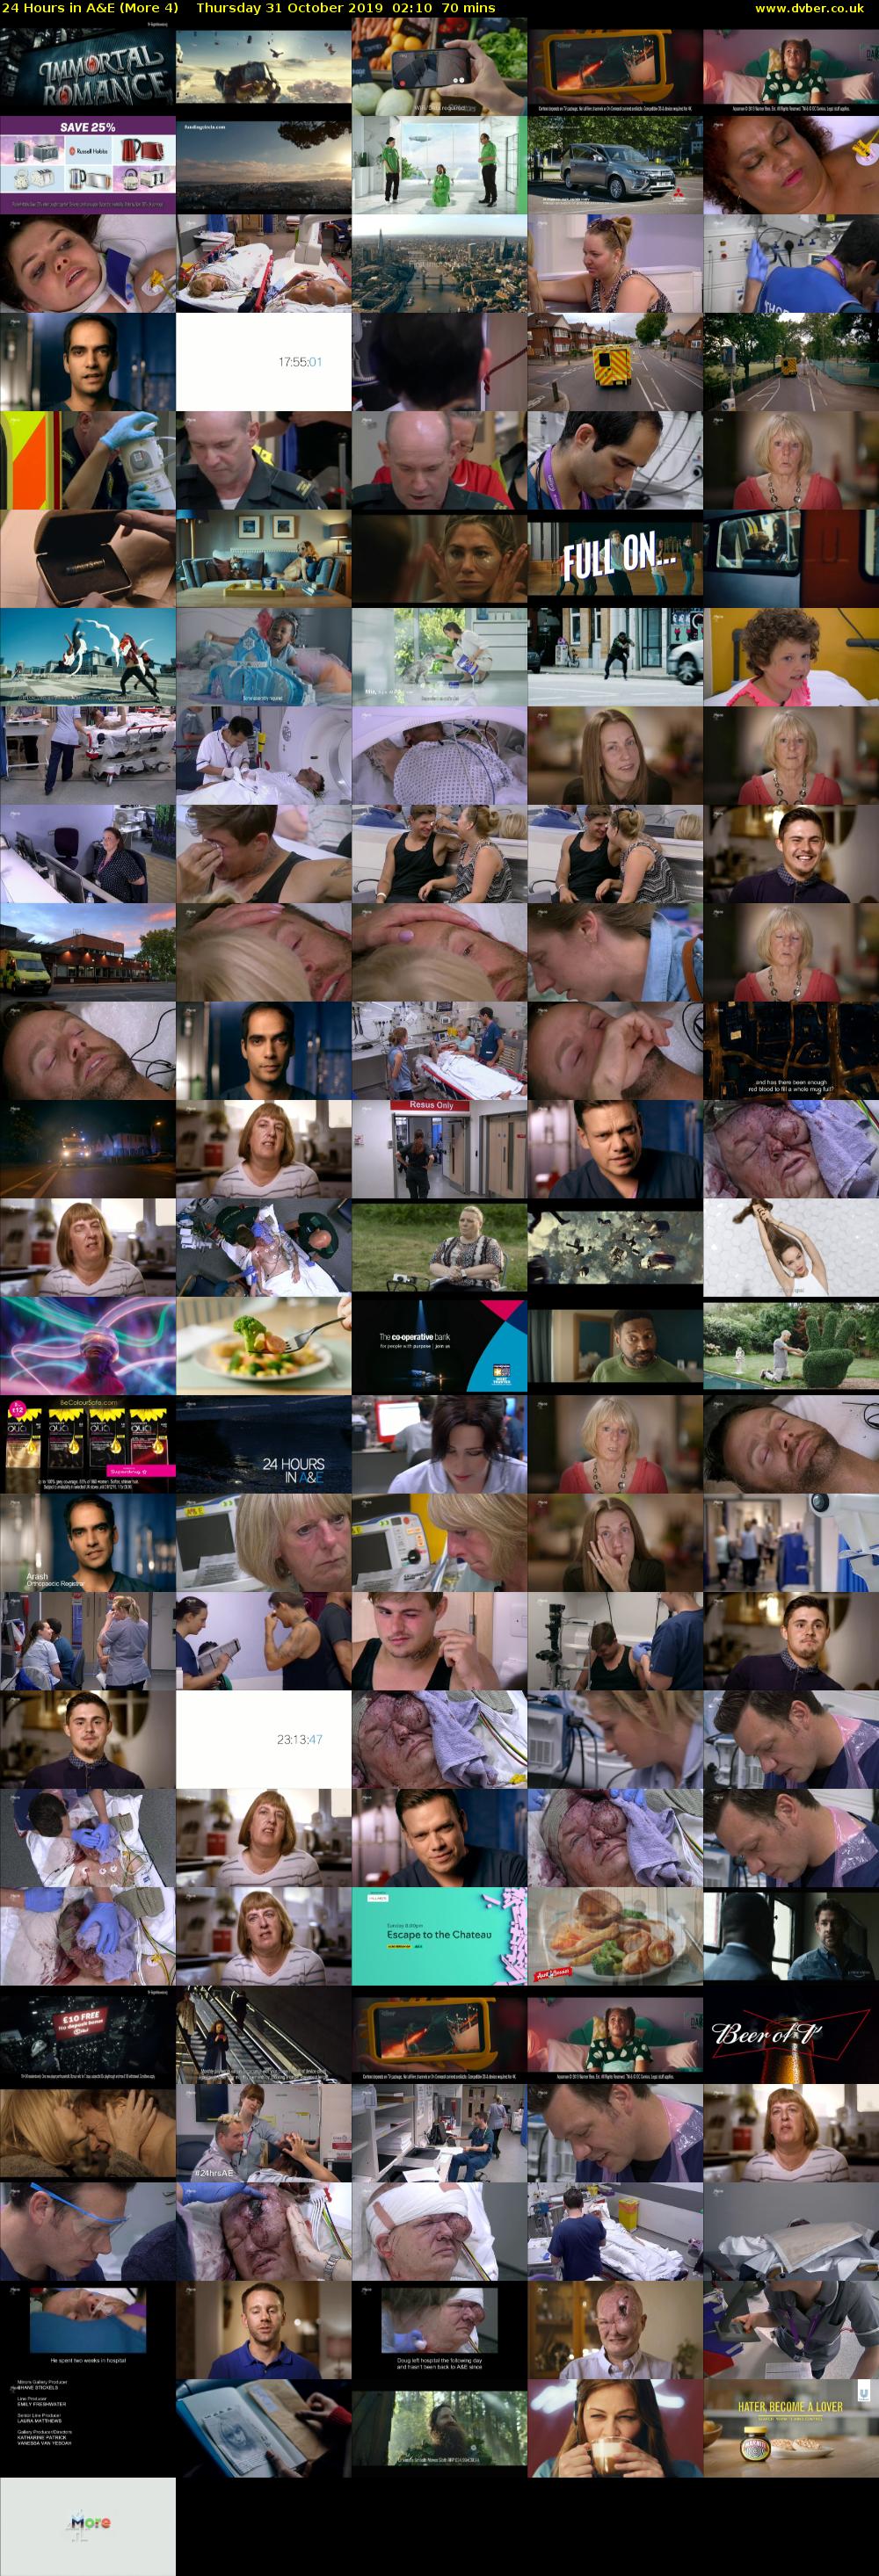 24 Hours in A&E (More 4) Thursday 31 October 2019 02:10 - 03:20